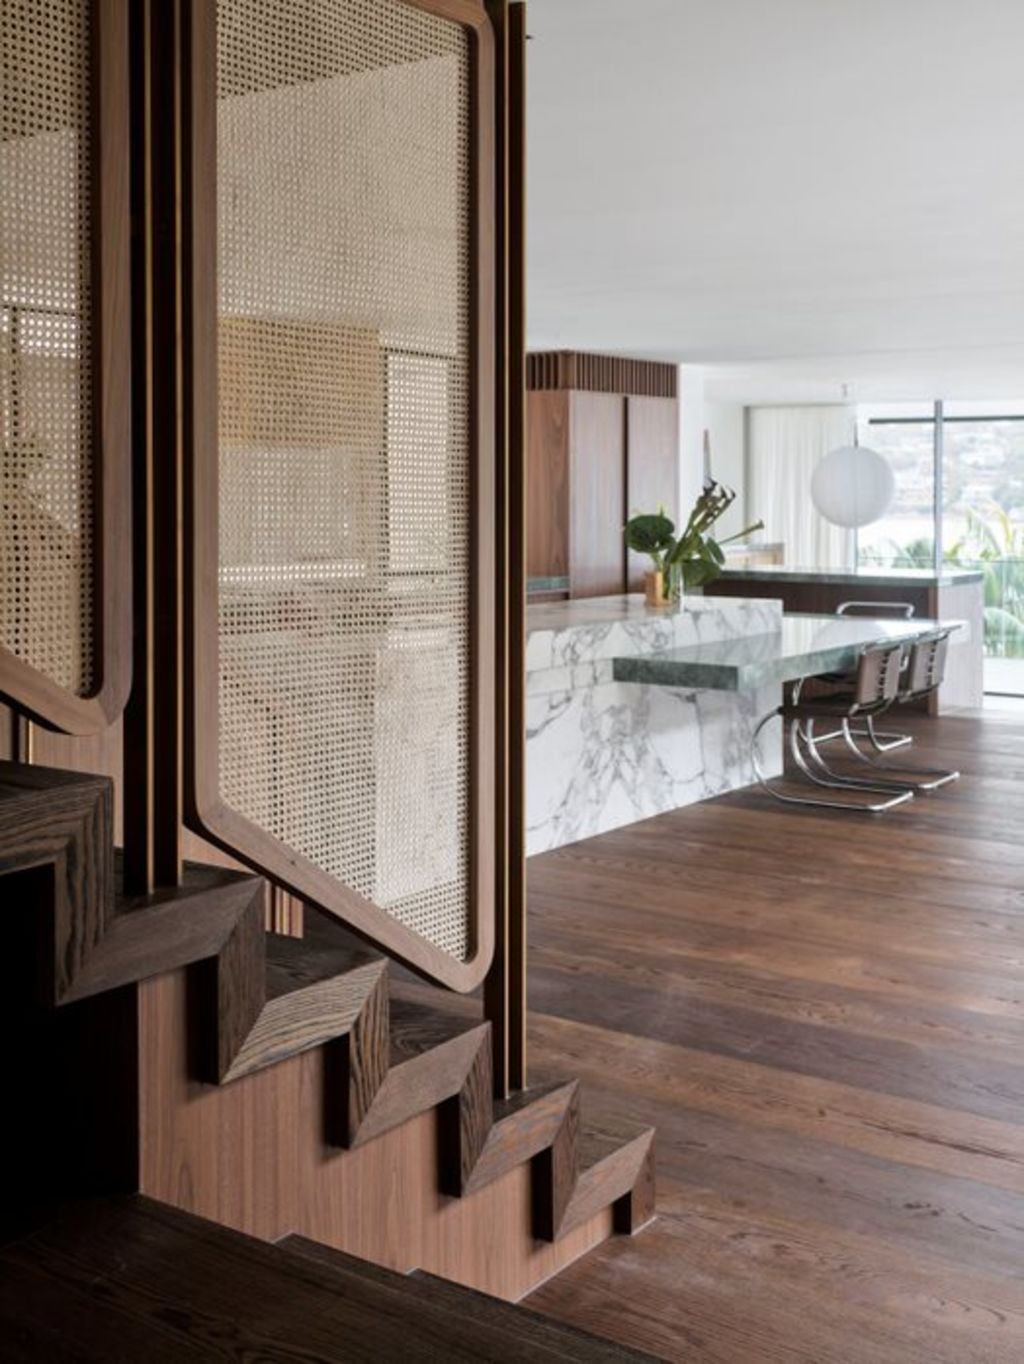 Check the edge detailing on the staircase: rattan. Photo: Anson Smart